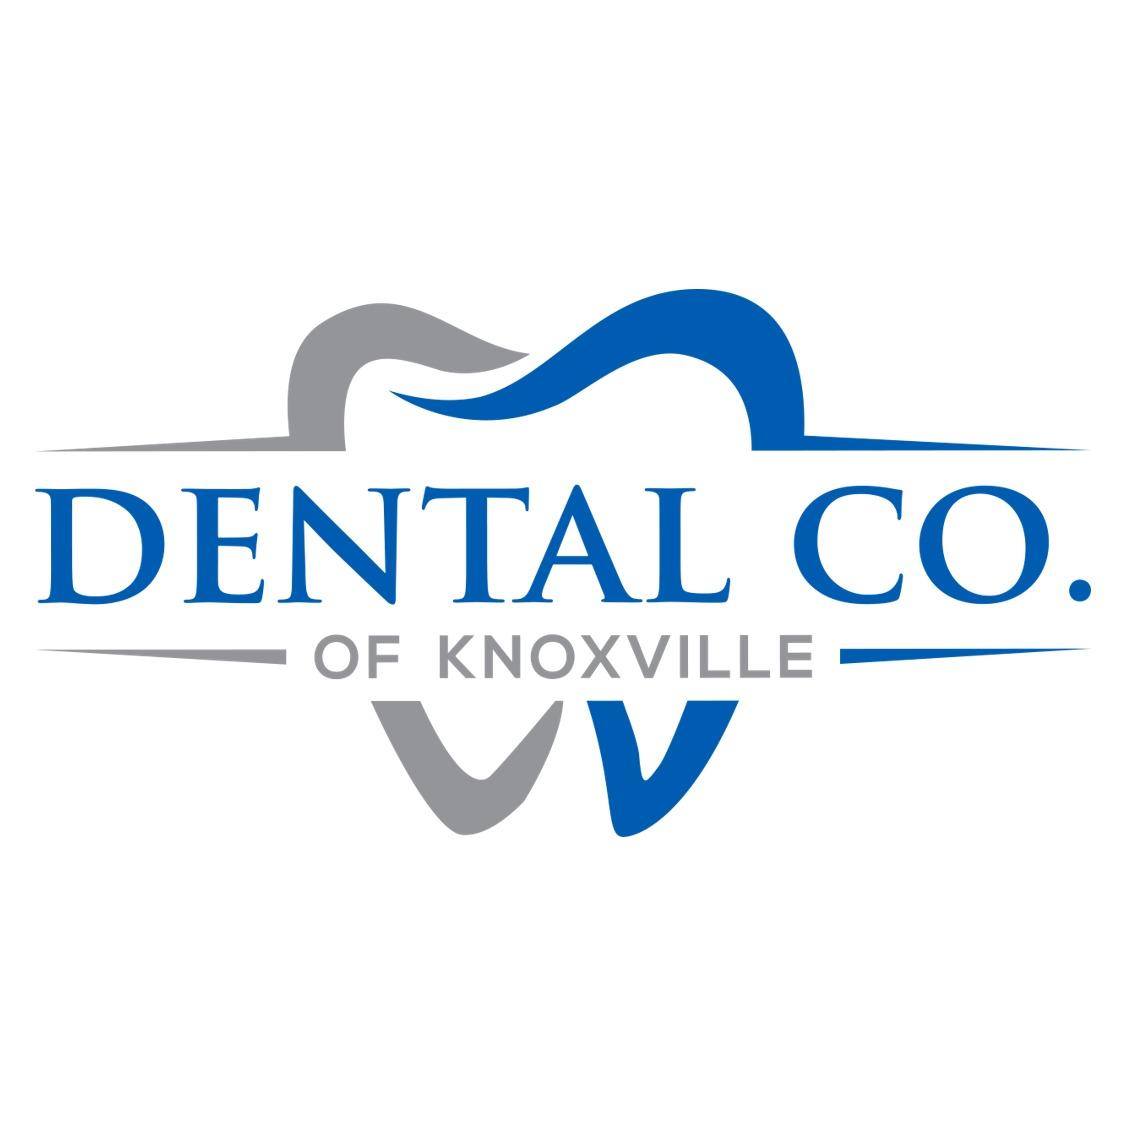 Dental Co. of Knoxville